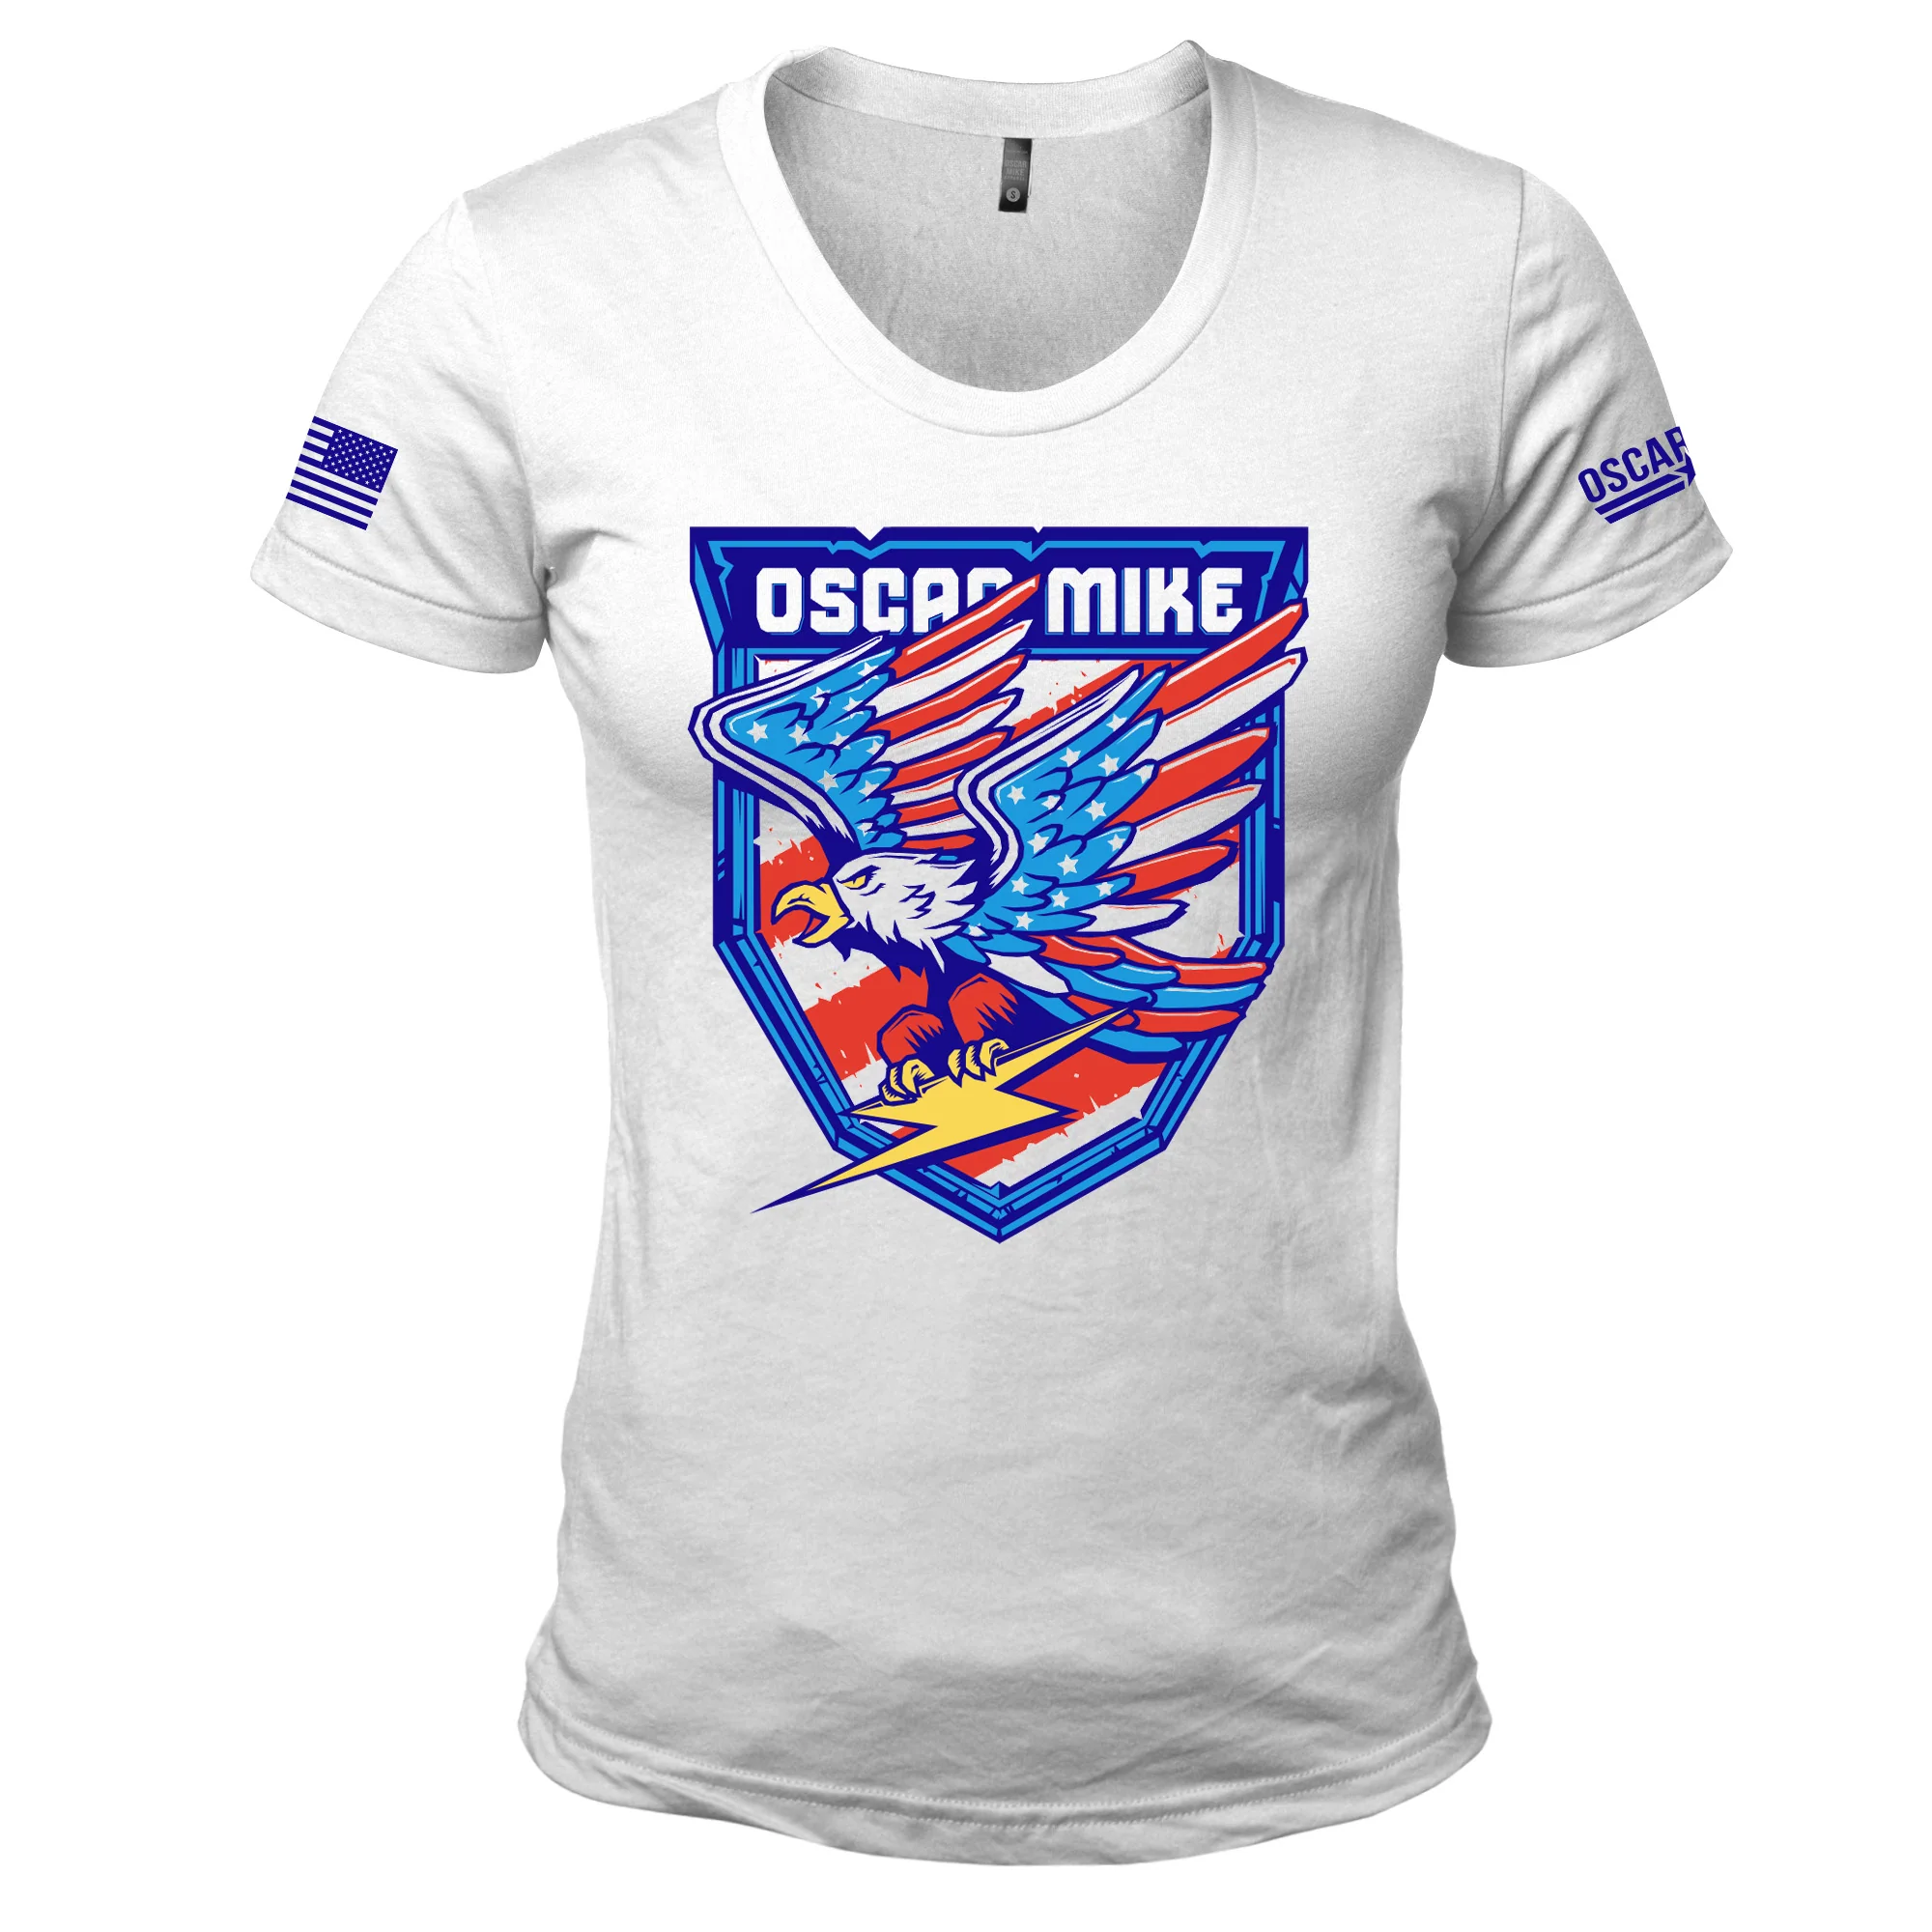 Oscar Mike Women's Ride the Lightning Tee posted by ProdOrigin USA in Women's Apparel 